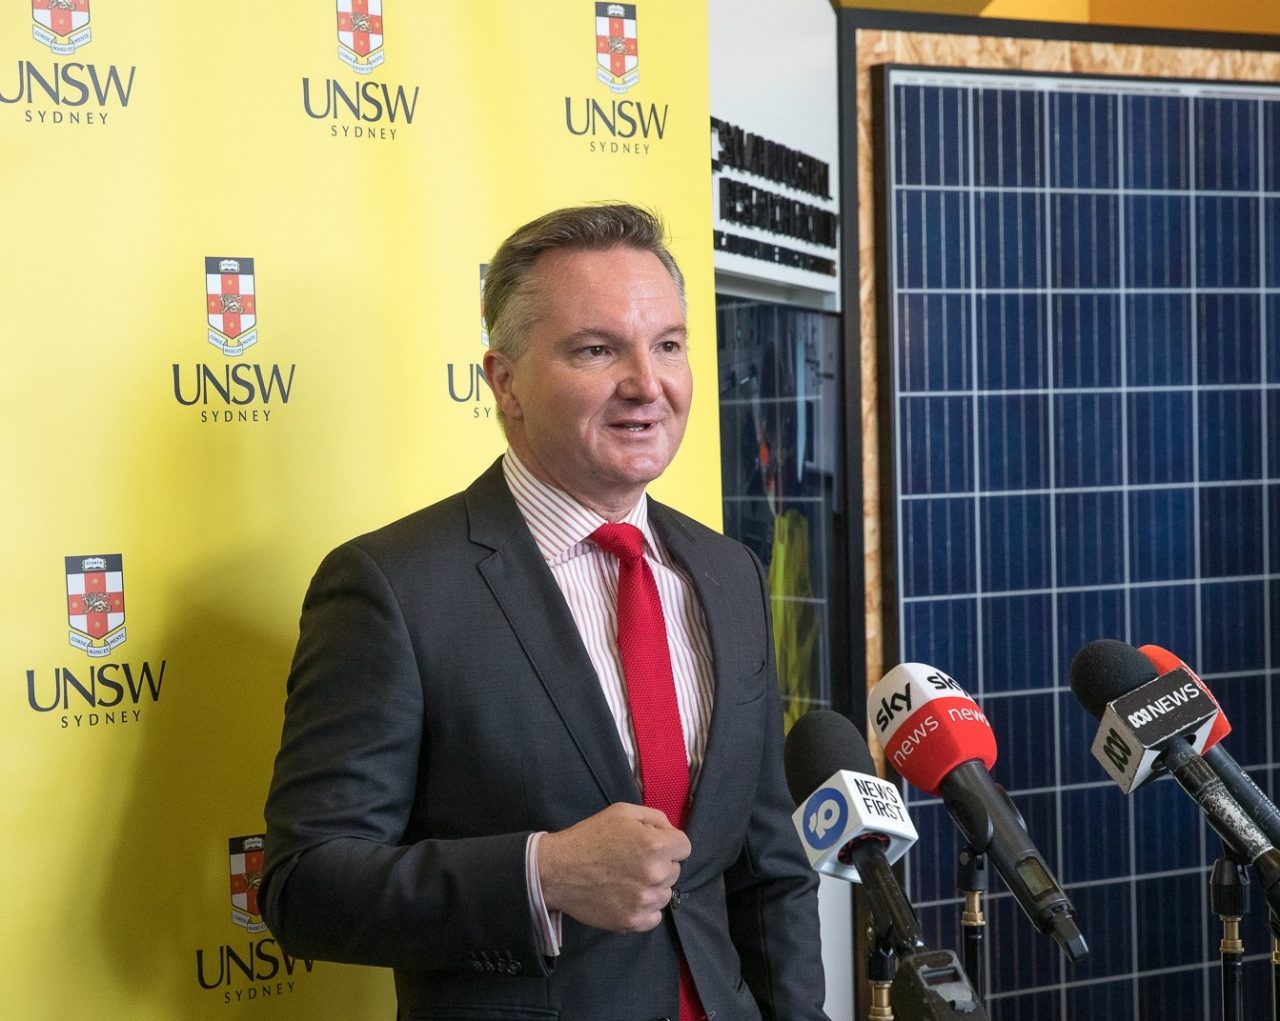 Chris Bowen, Minister for Climate Change and Energy, at an event at UNSW's Solar Industrial Research Facility